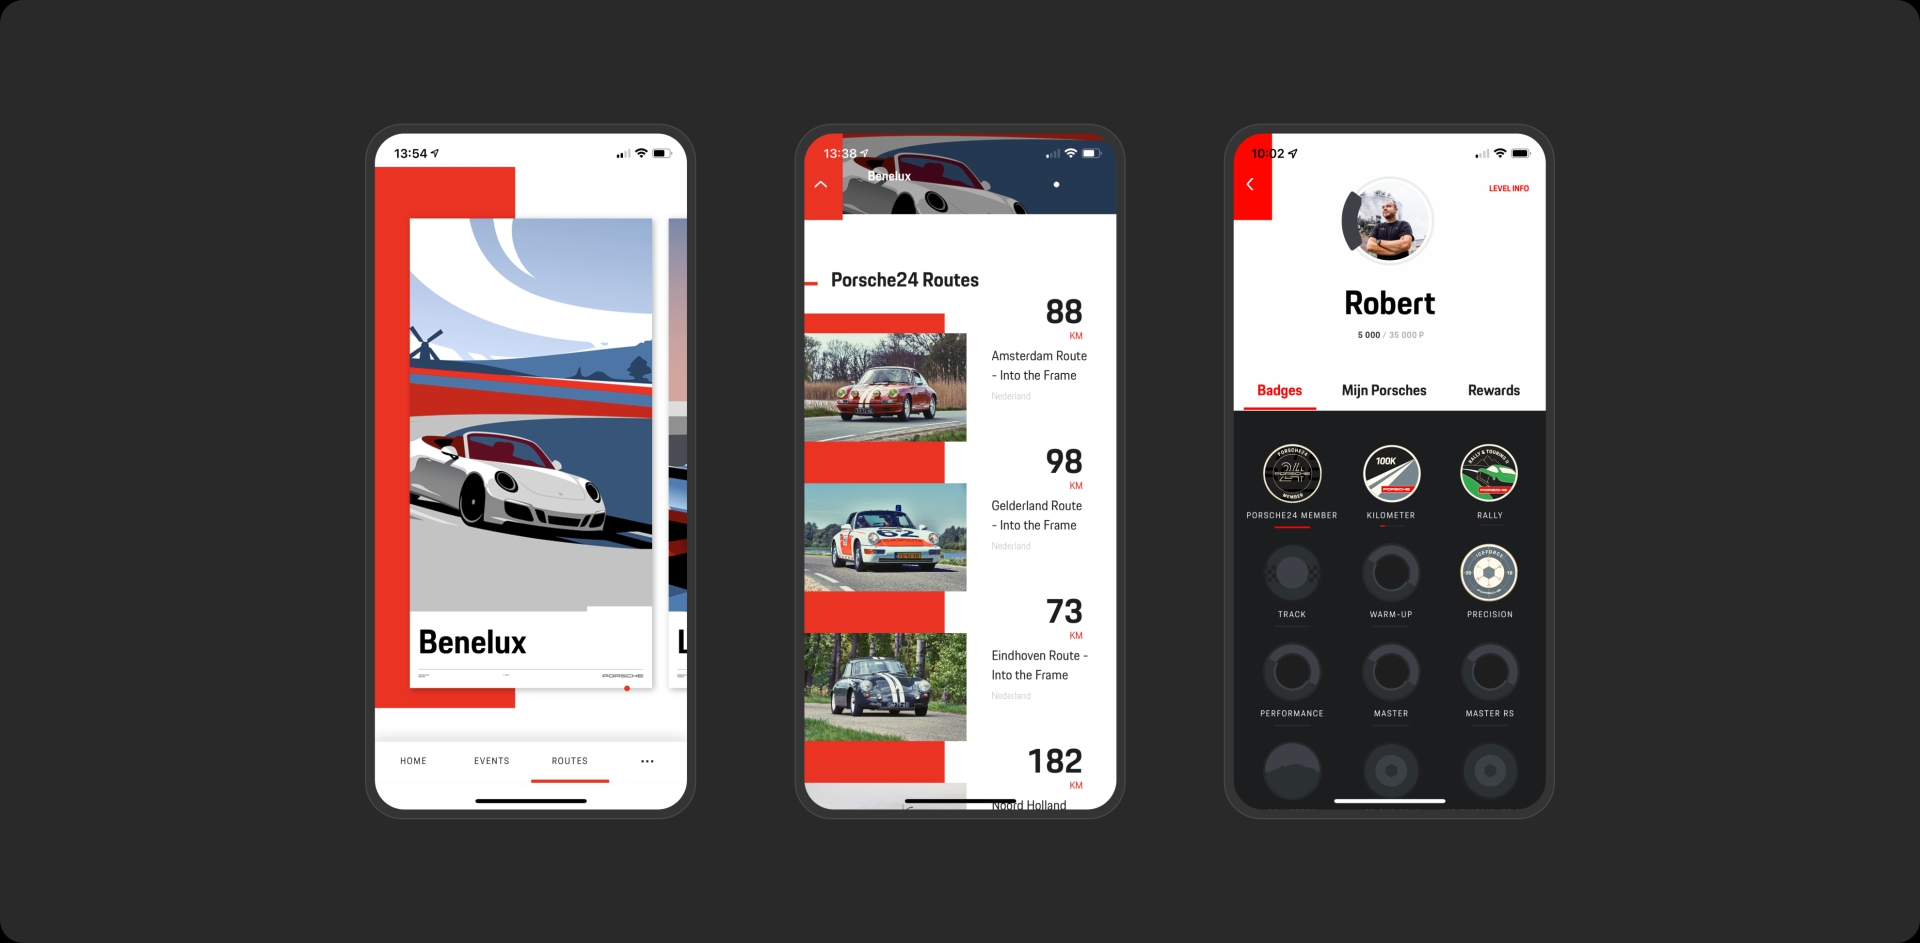 Porsche mockup screen with profile page and news article detail